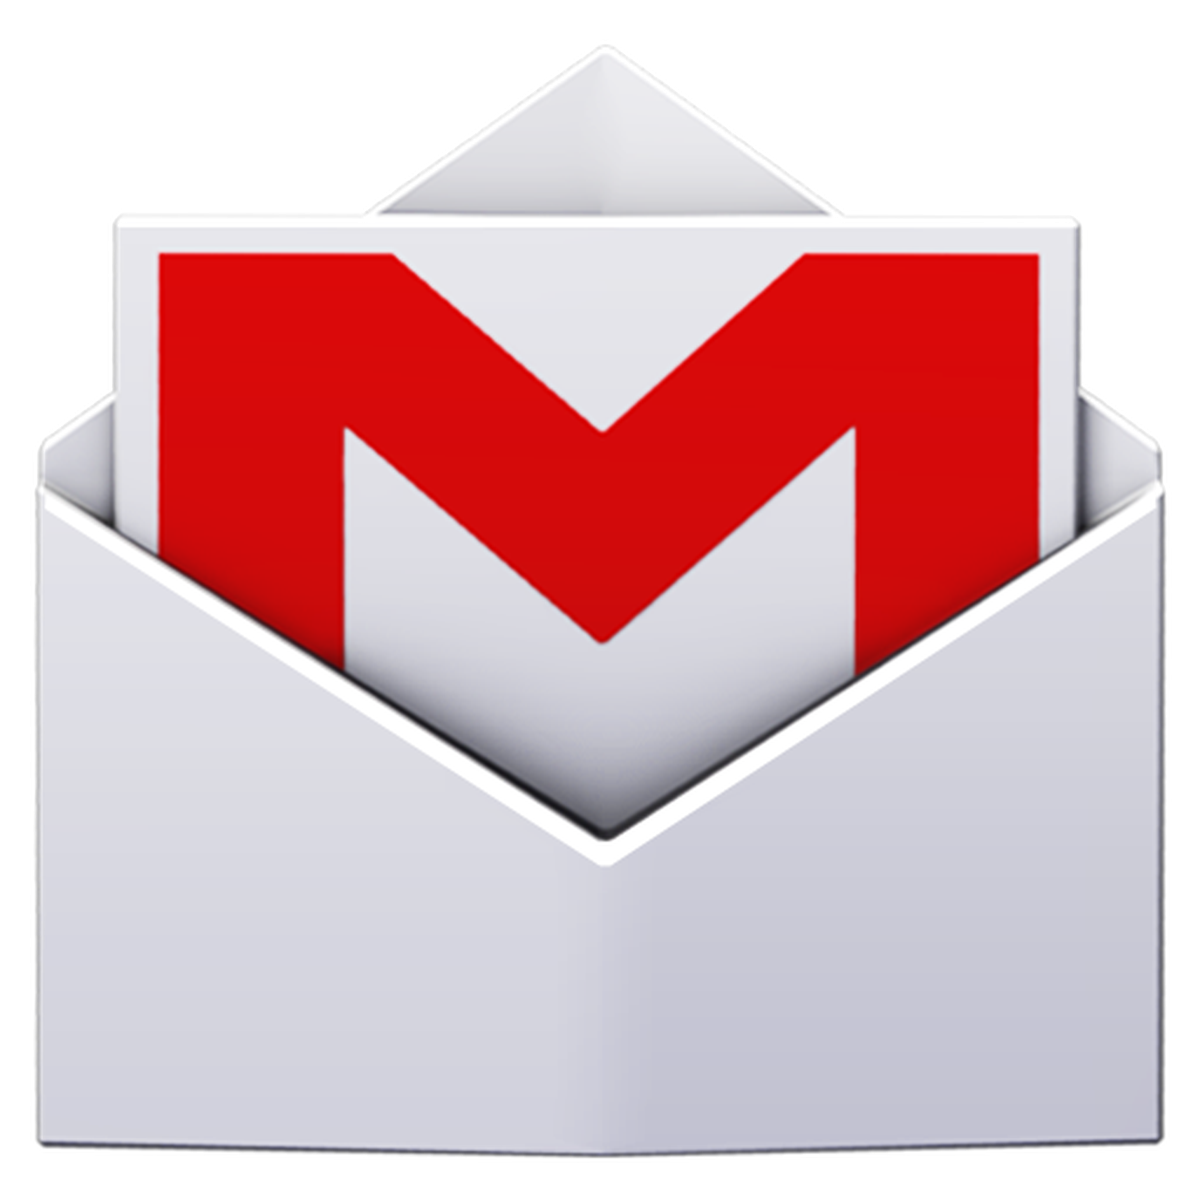 Gmail users can now view images in-line